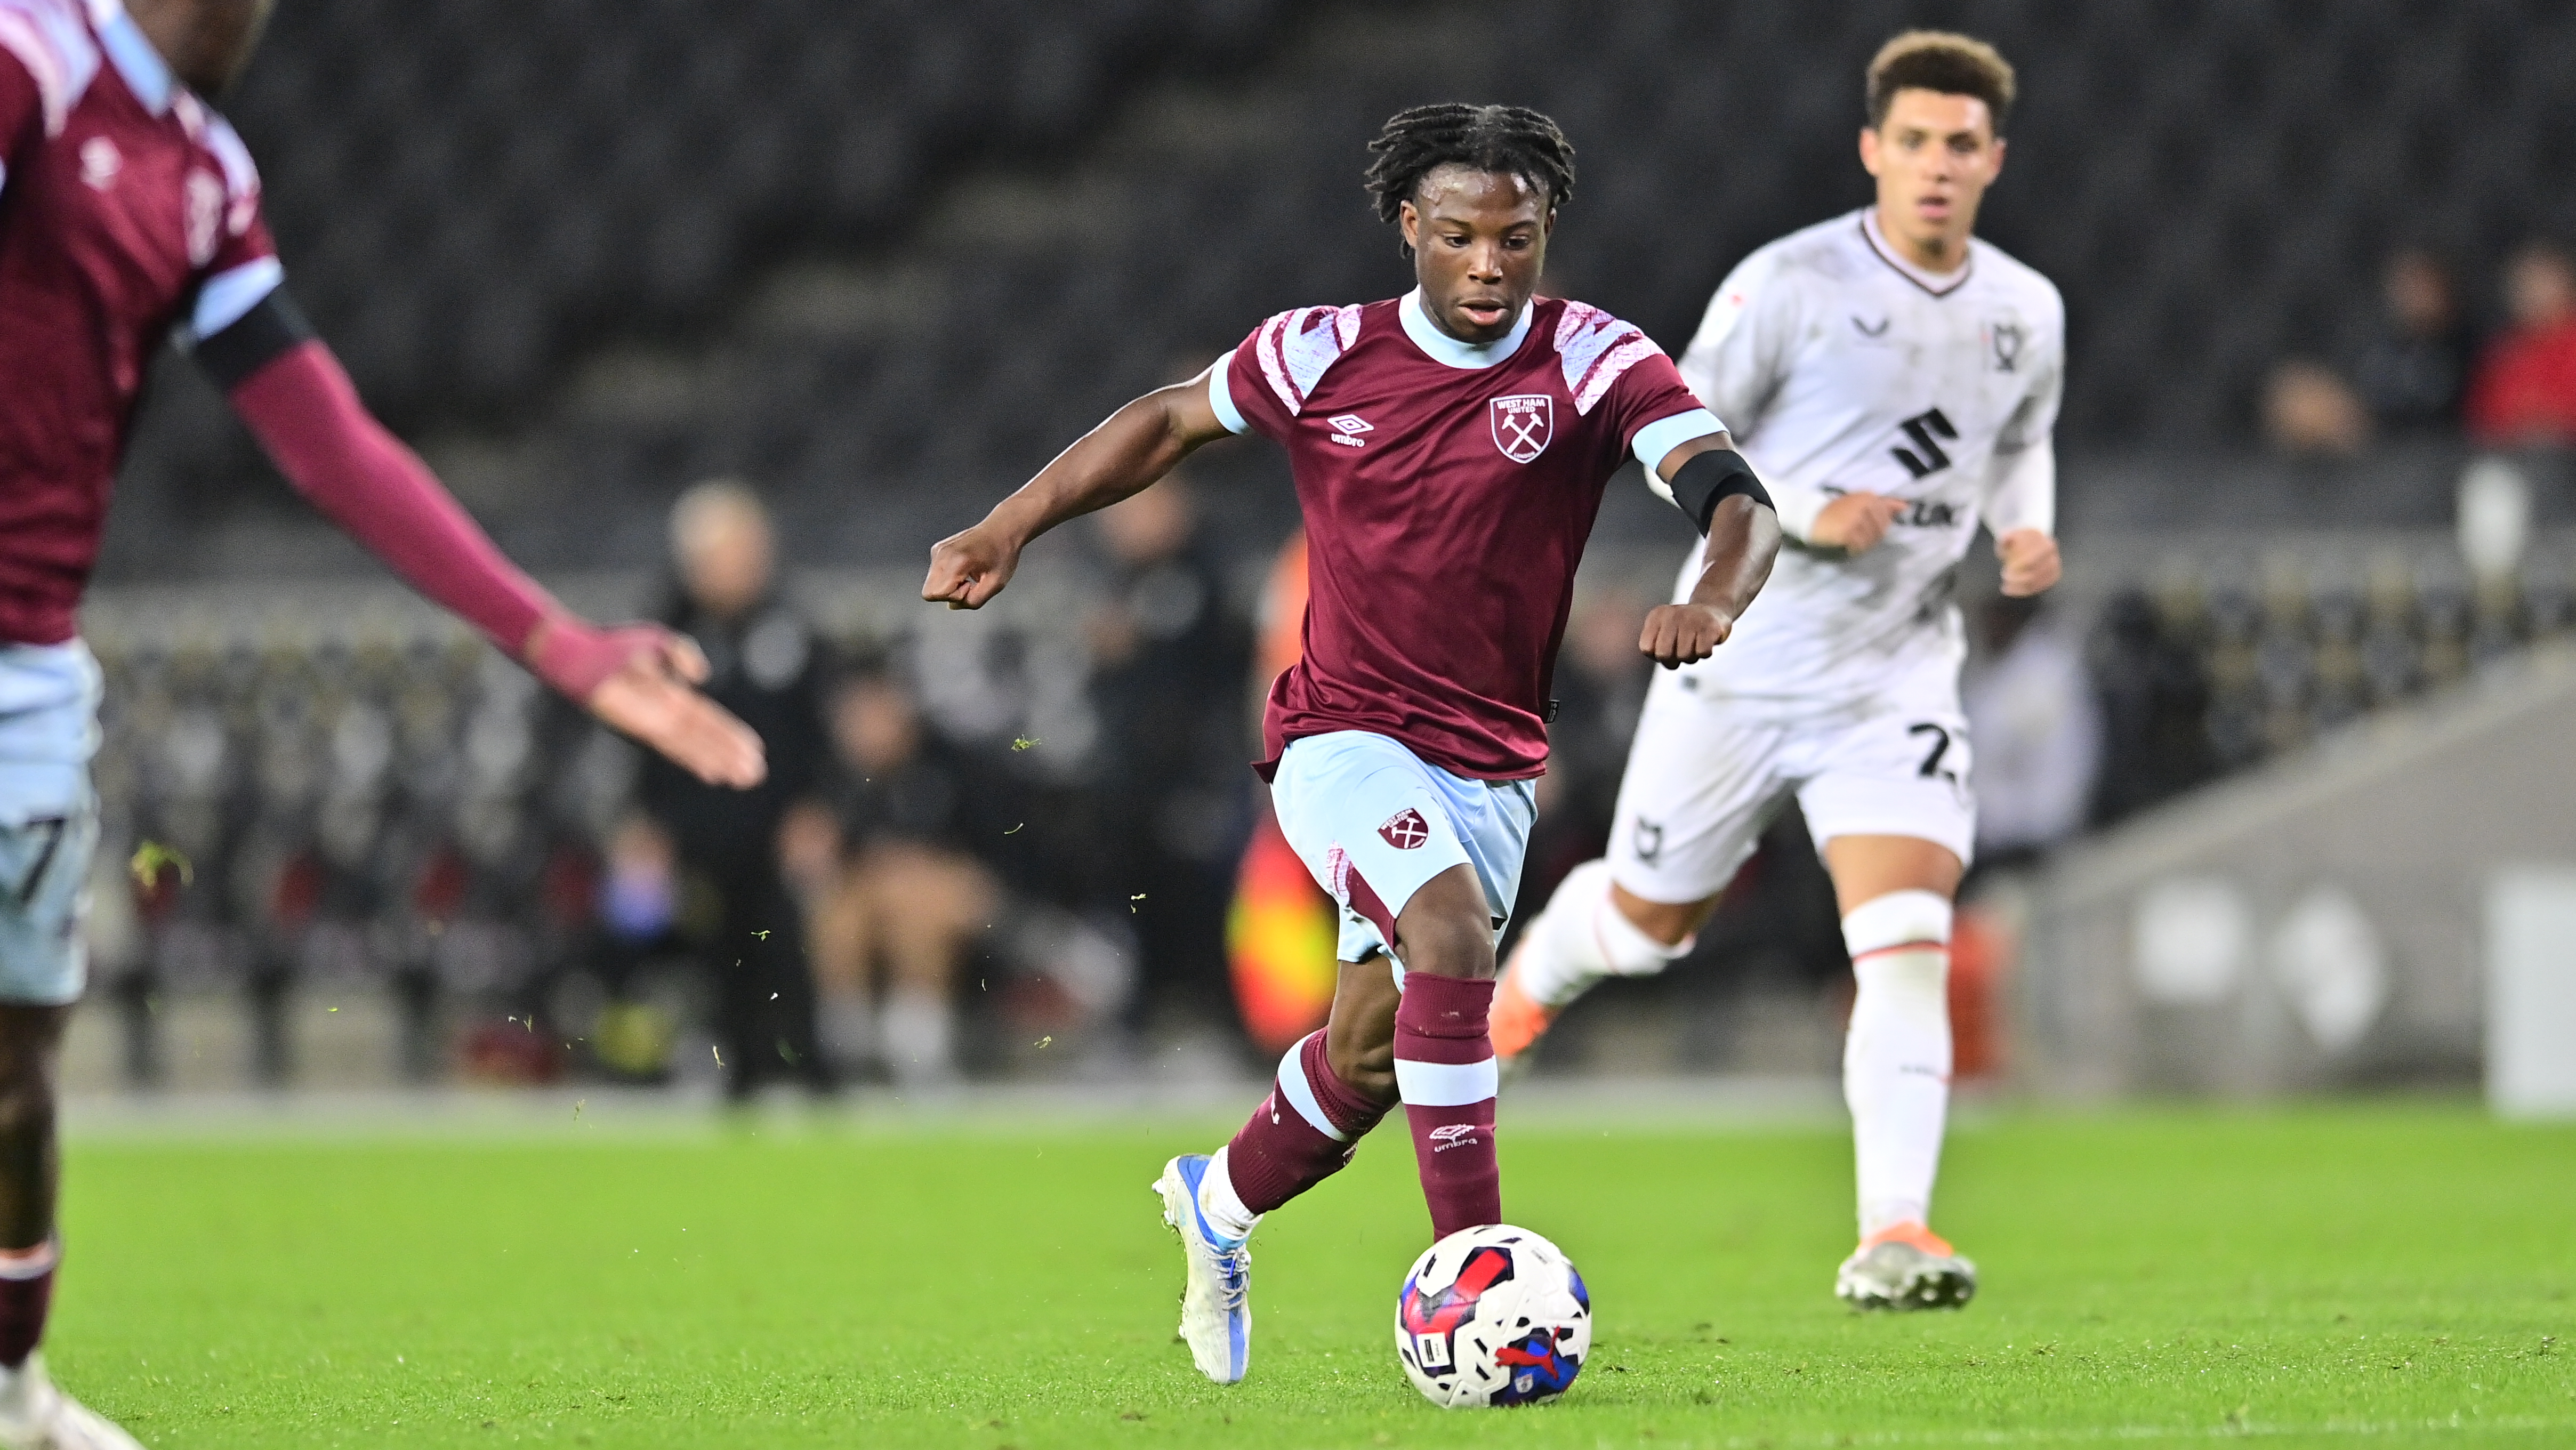 West Ham United U21s are defeated 2-0 by MK Dons